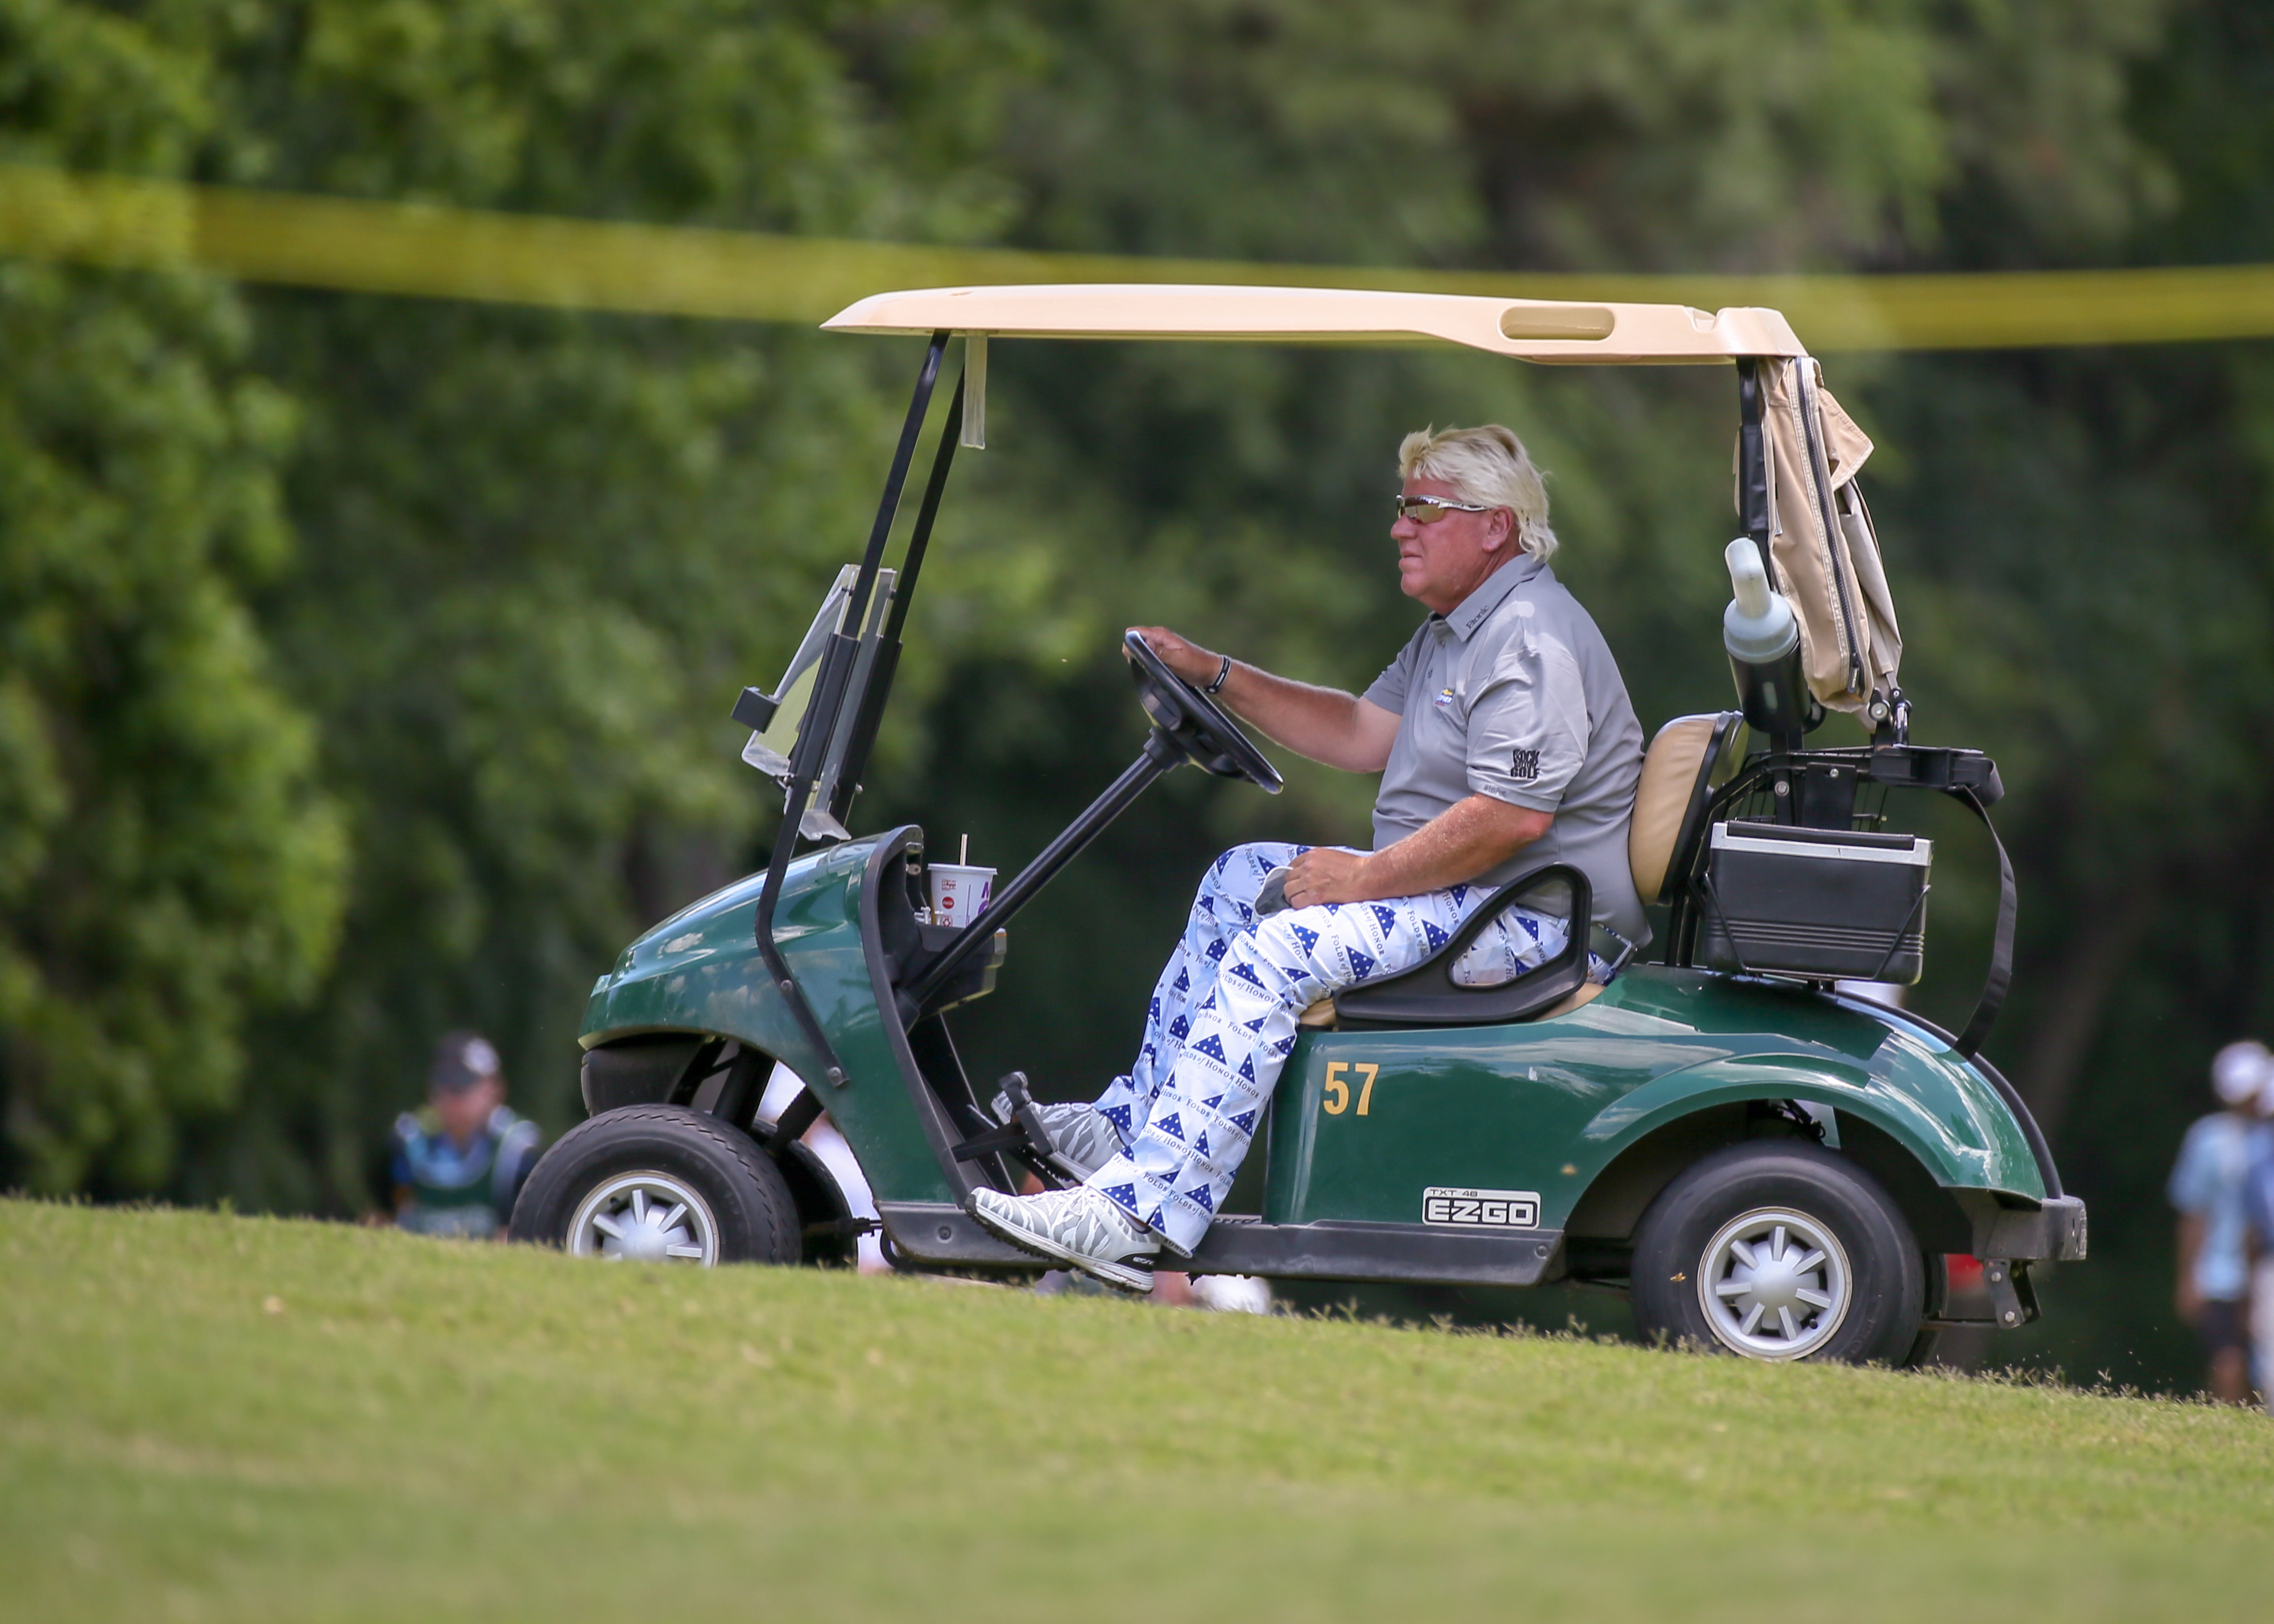 PGA Championship 2019: John Daly approved to use cart at Bethpage,  according to AP | Golf News and Tour Information | Golf Digest